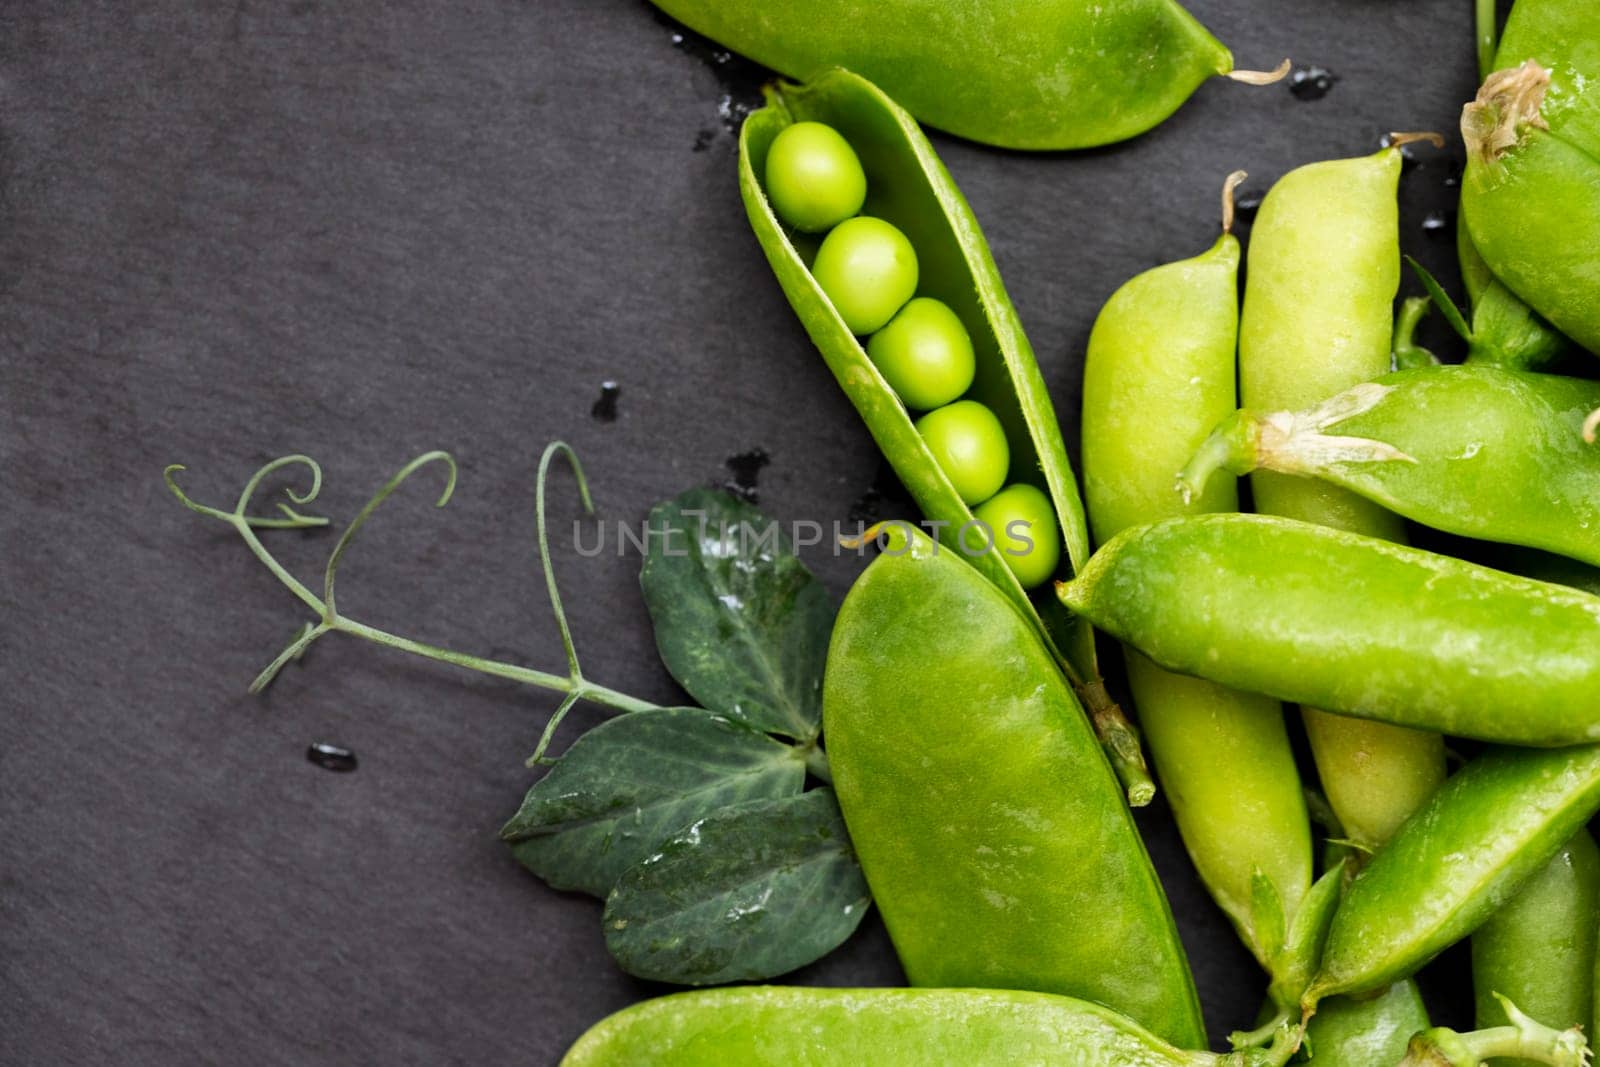 Organic green peas in pods, freshly harvested and displayed on a dark slate background, with a focus on healthy eating and natural produce